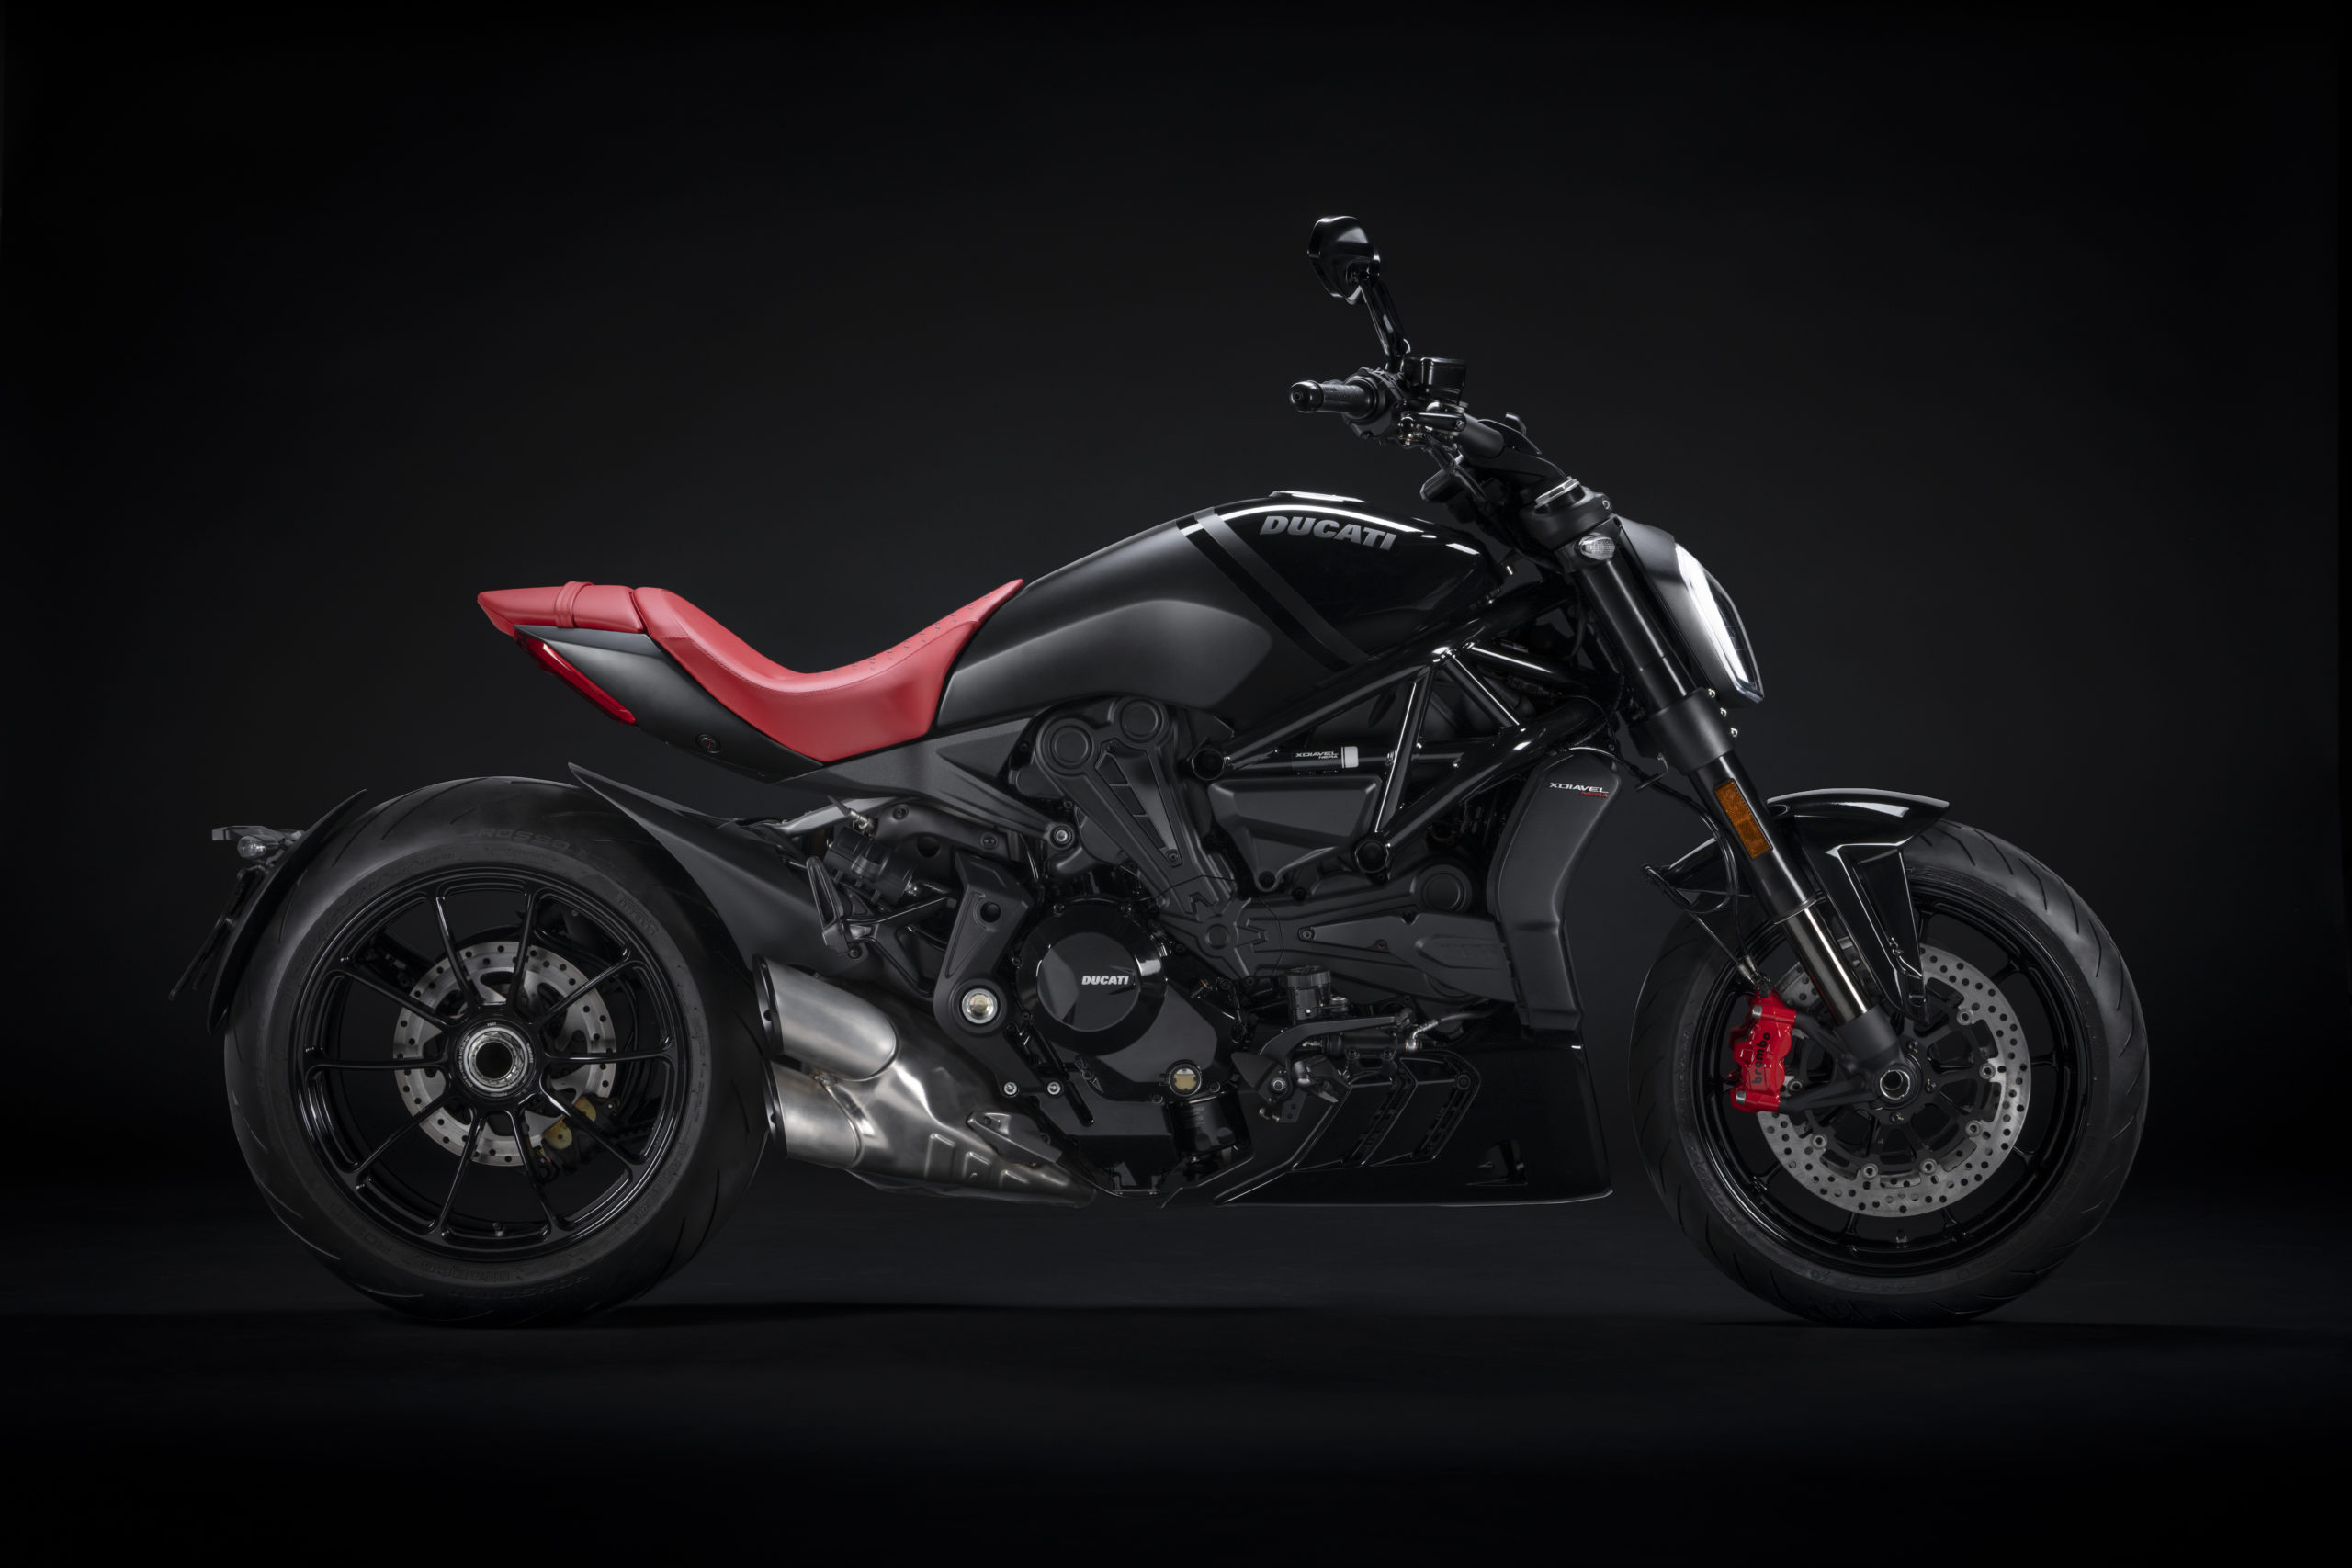 A view of the Ducati XDiavel Nera, complete with dedicated accoutrements